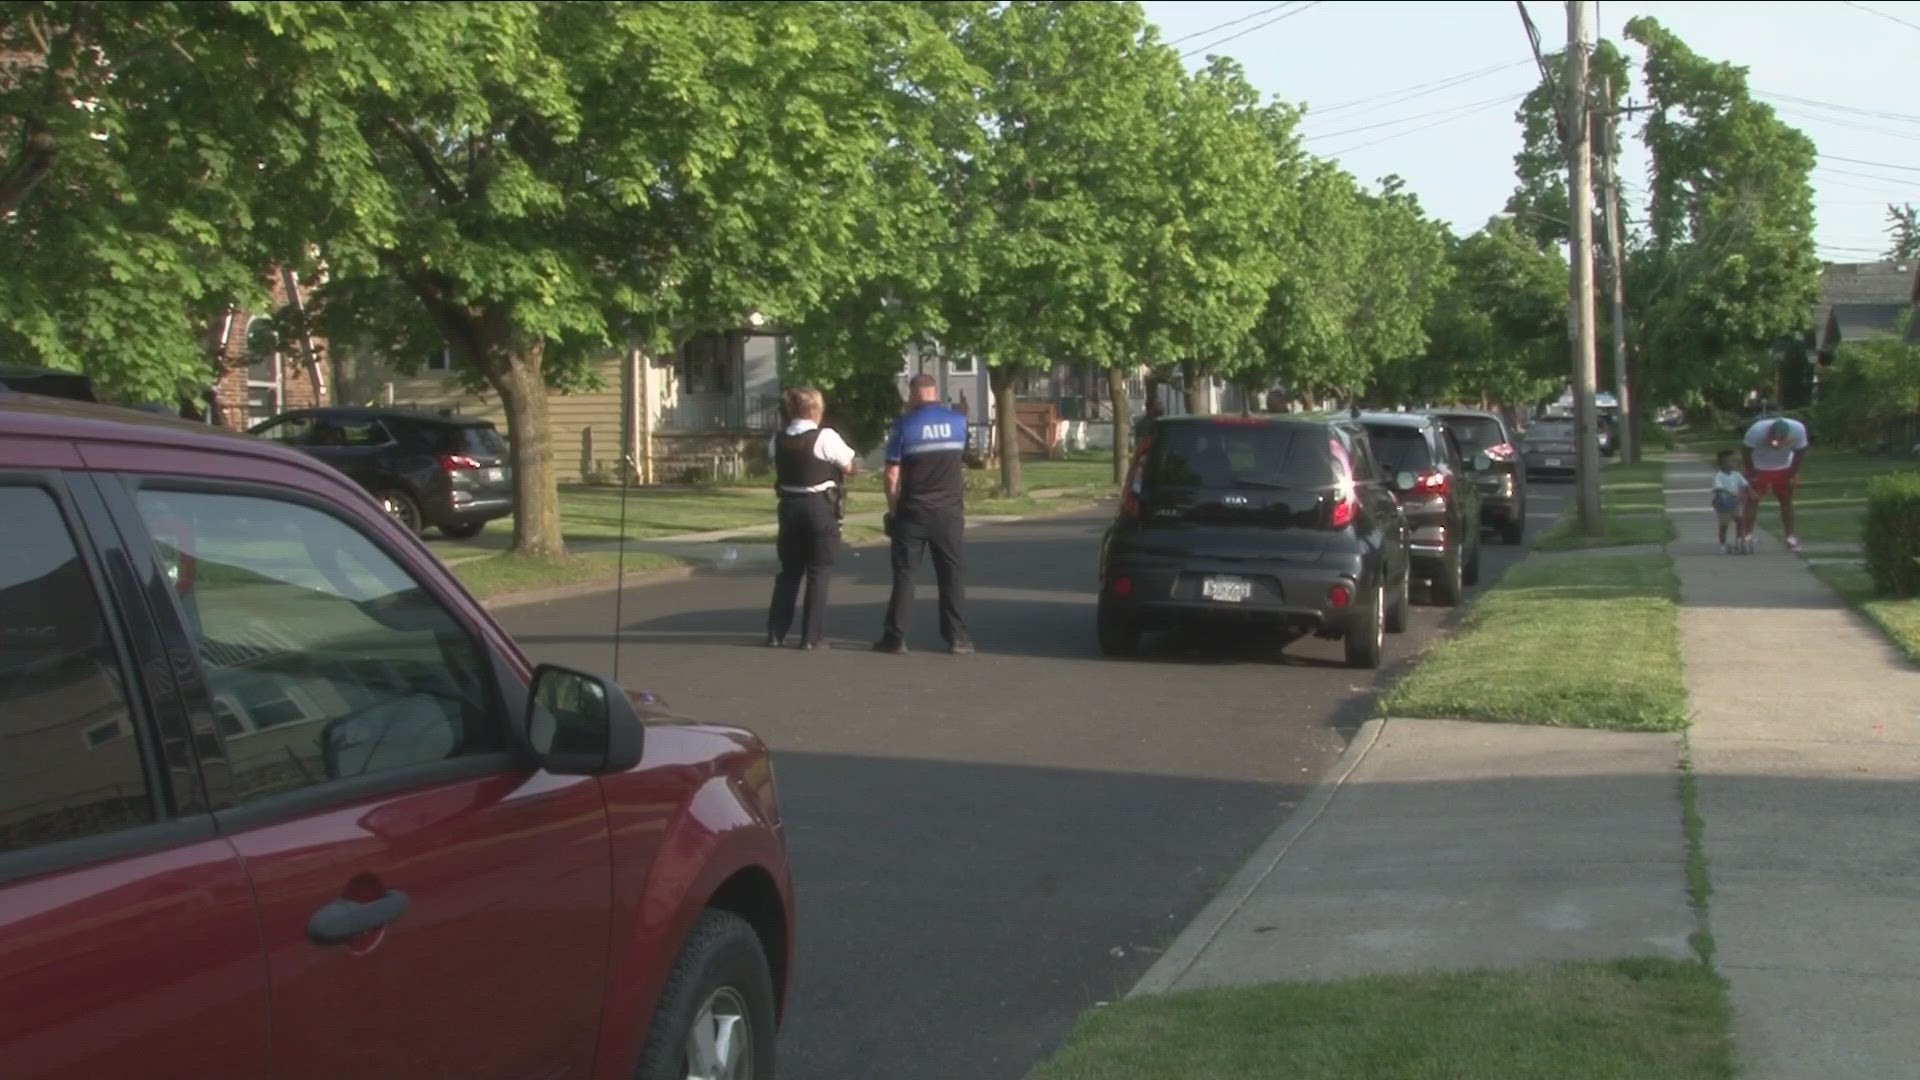 The incident happened just before 6 p.m. on East Delevan Avenue and Hazelwood Avenue.